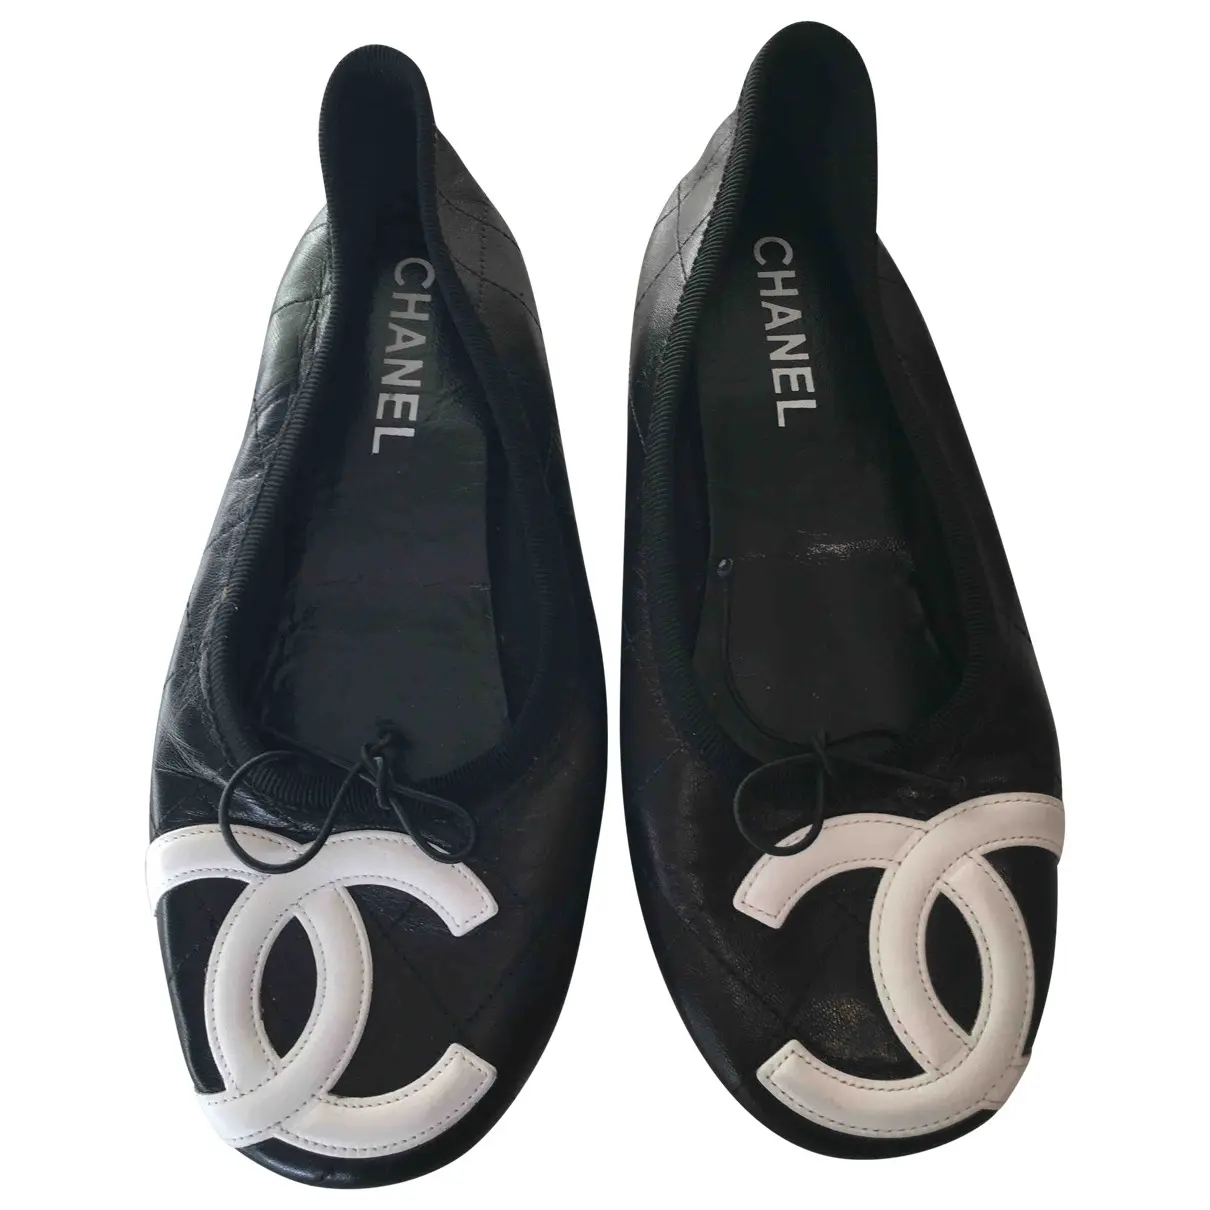 Cambon leather ballet flats Chanel